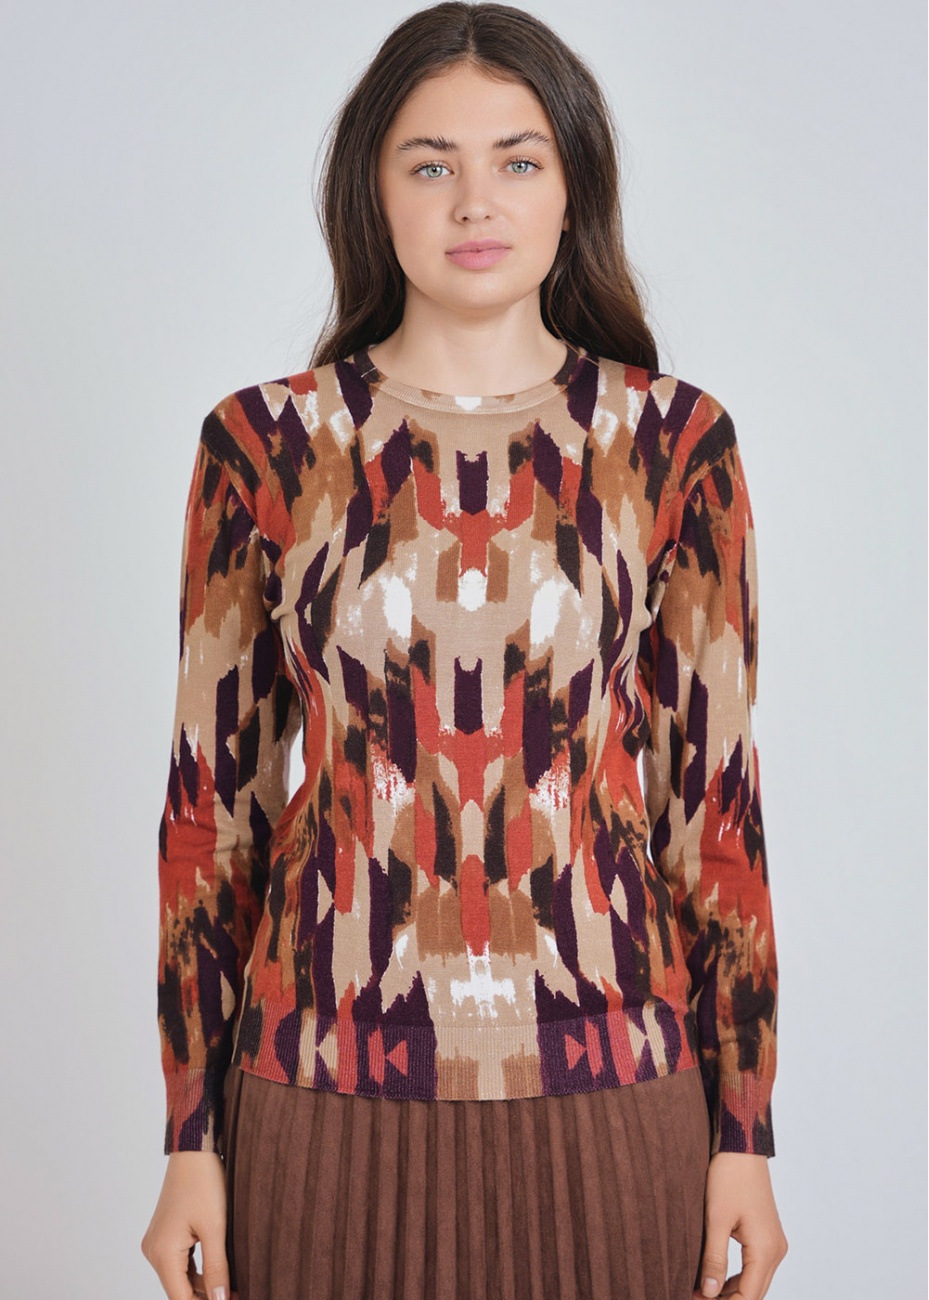 Multi-Hued Sweater with Artful Abstractions